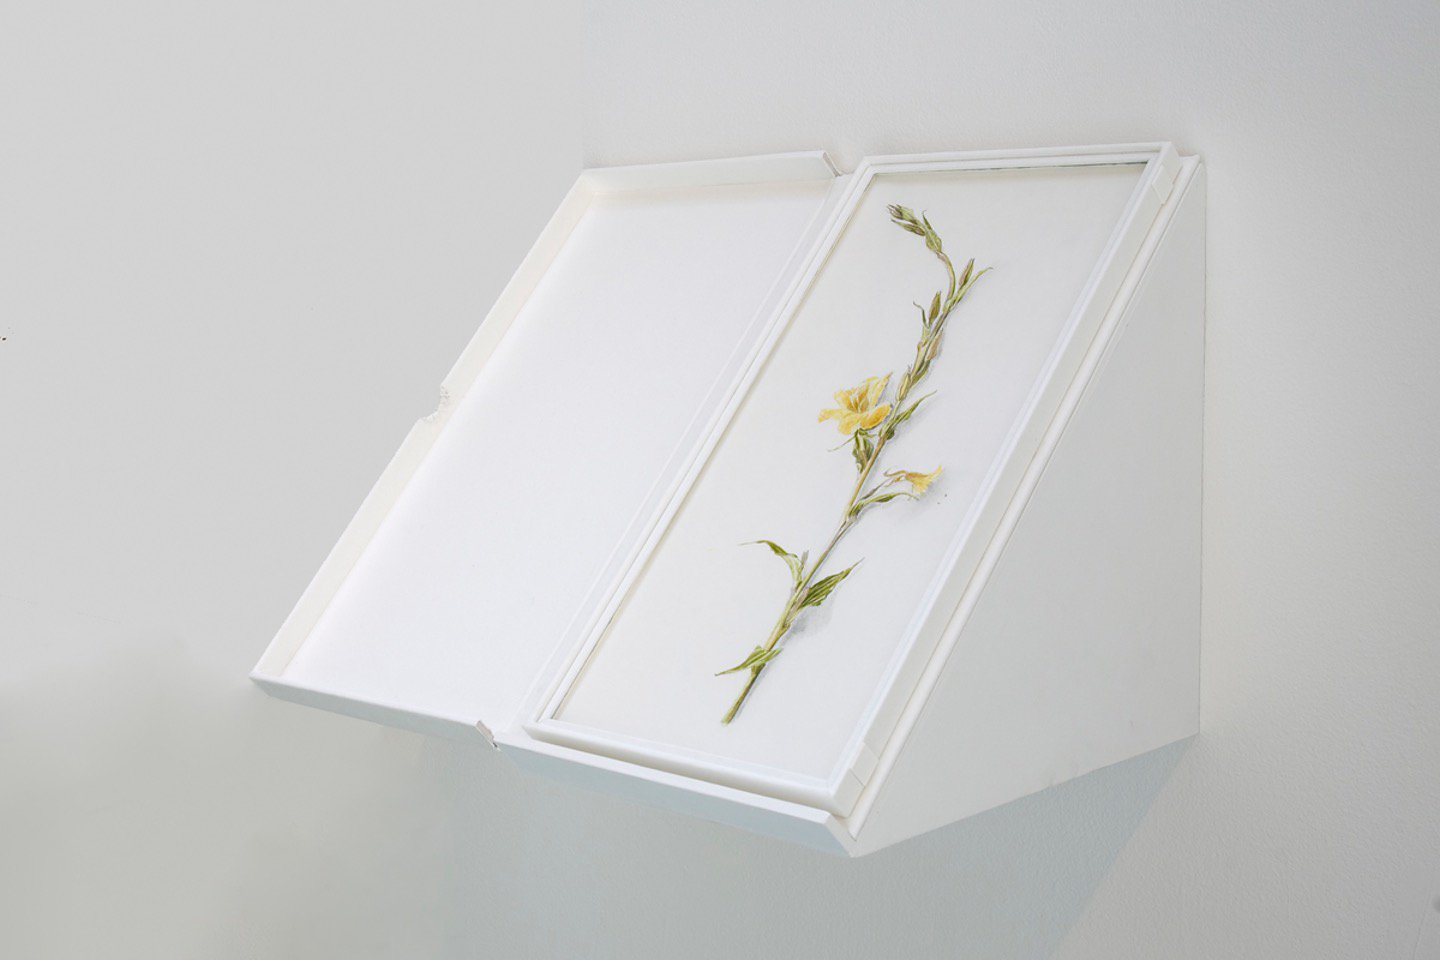   Evening Primrose   painted out of its own fugitive dye, in clamshell box, 2012 